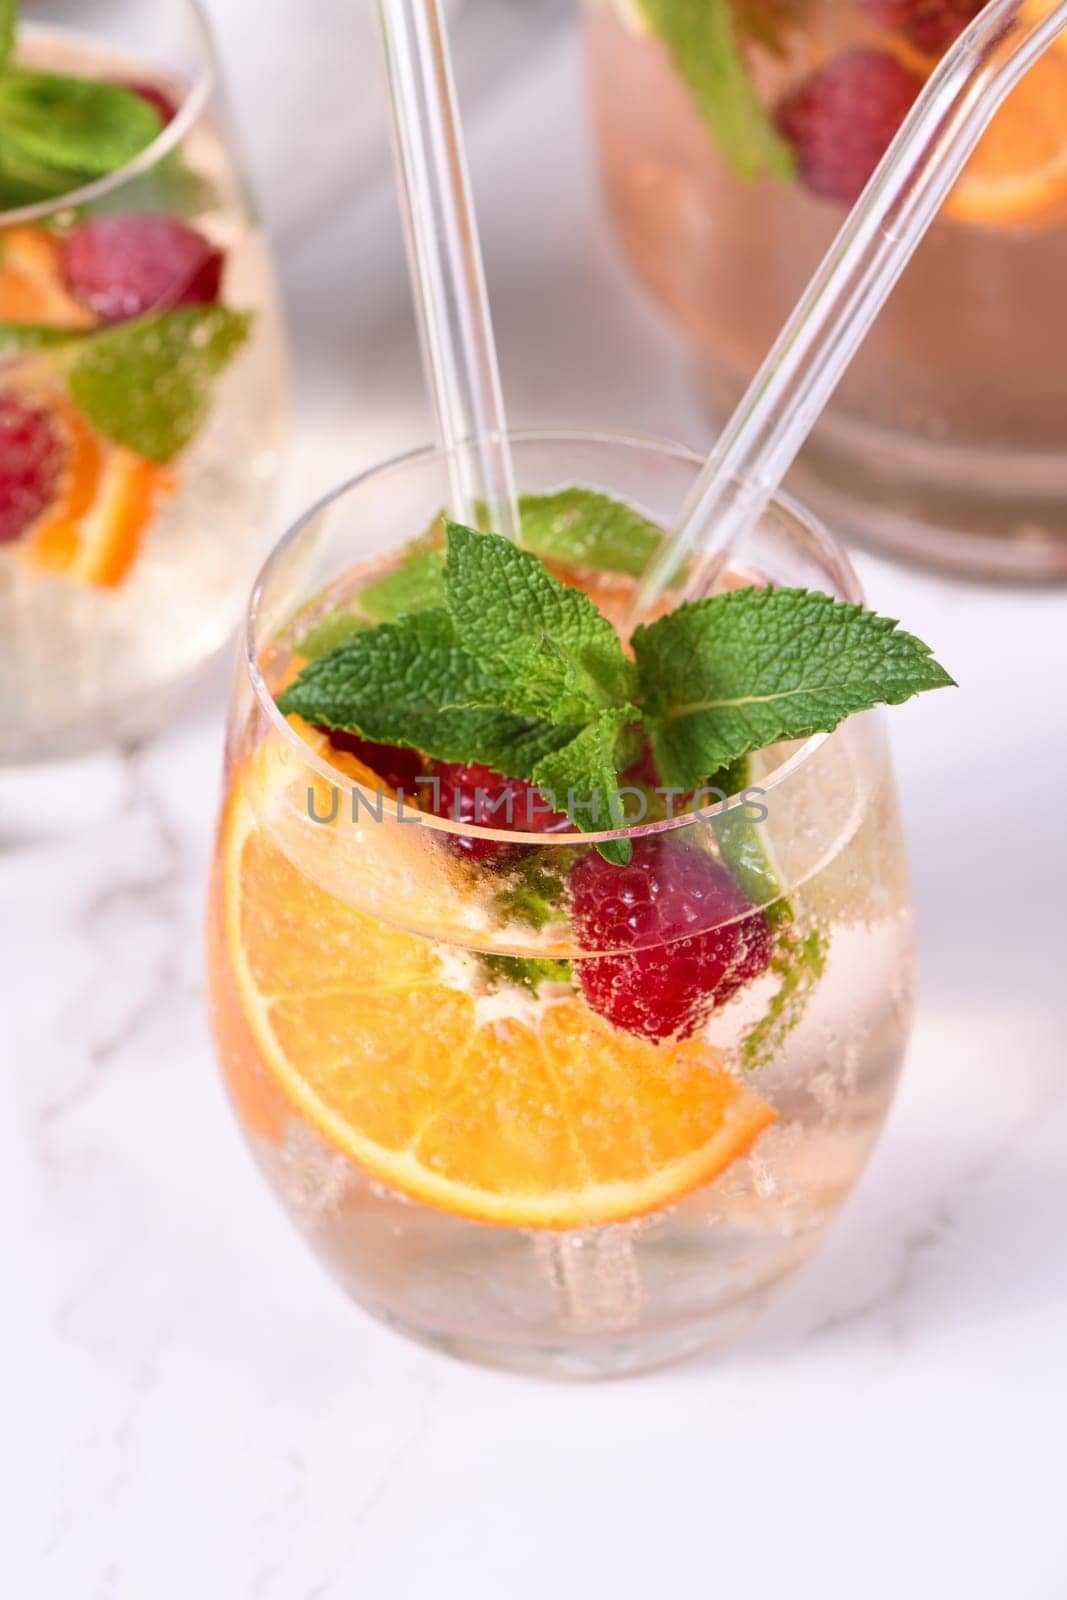 Summer Sangria cocktail or lemonade with raspberry, orange and mint. Refreshing organic non-alcoholic, Detox vitaminized healthy drink, fruit in a in a glass. Quench your thirst on a hot day.